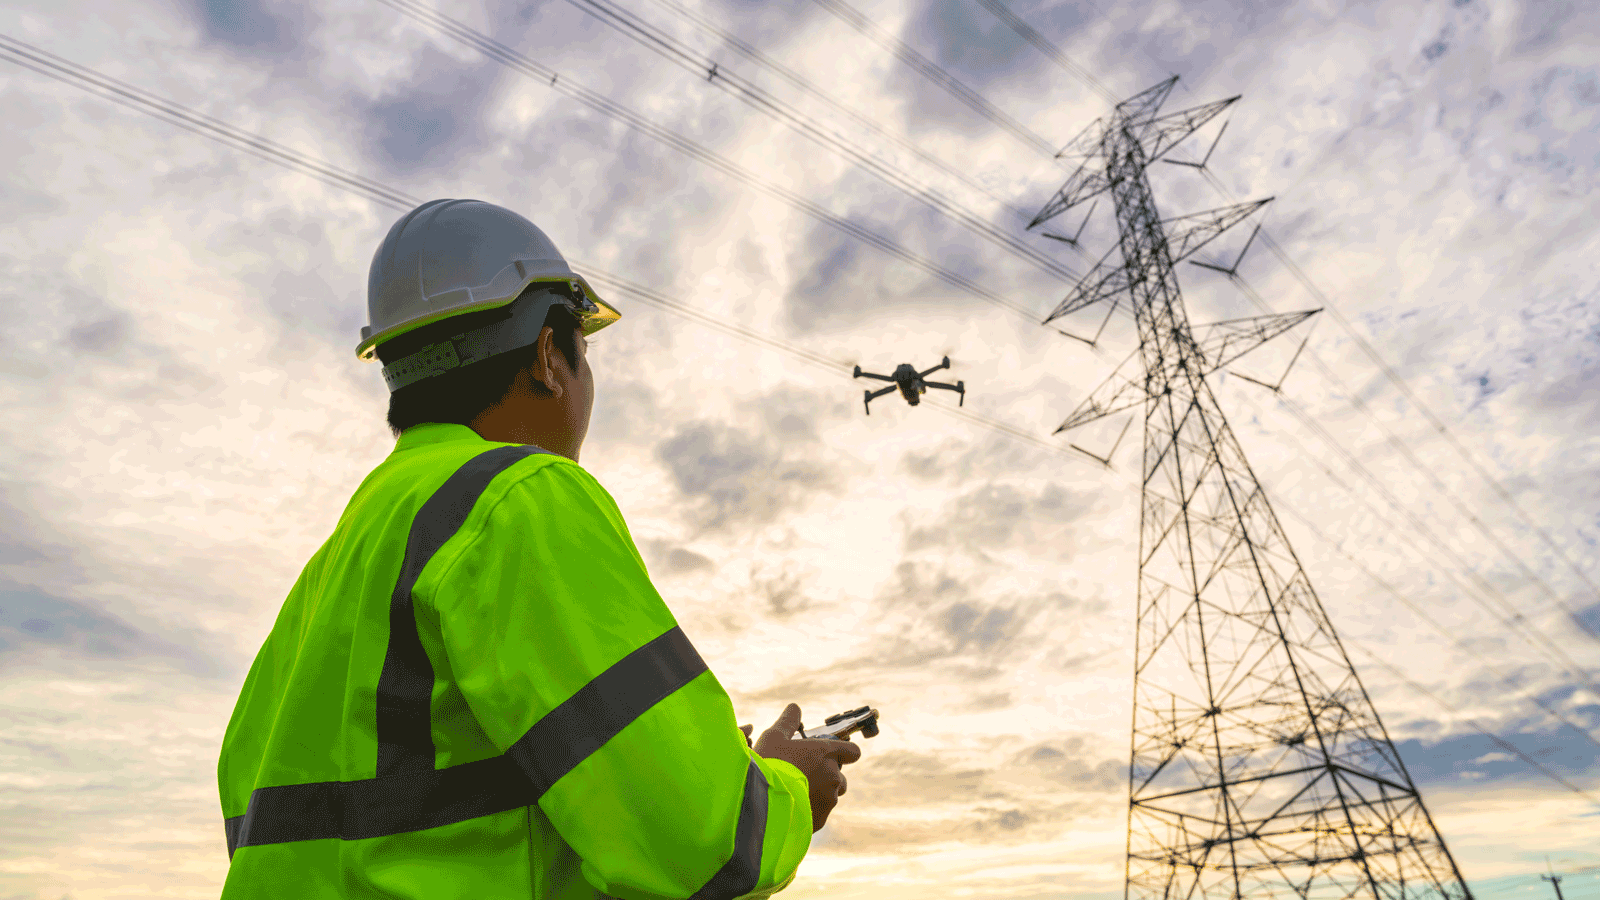 Proposed relaxation of drone rules could enable remote inspections of infrastructure